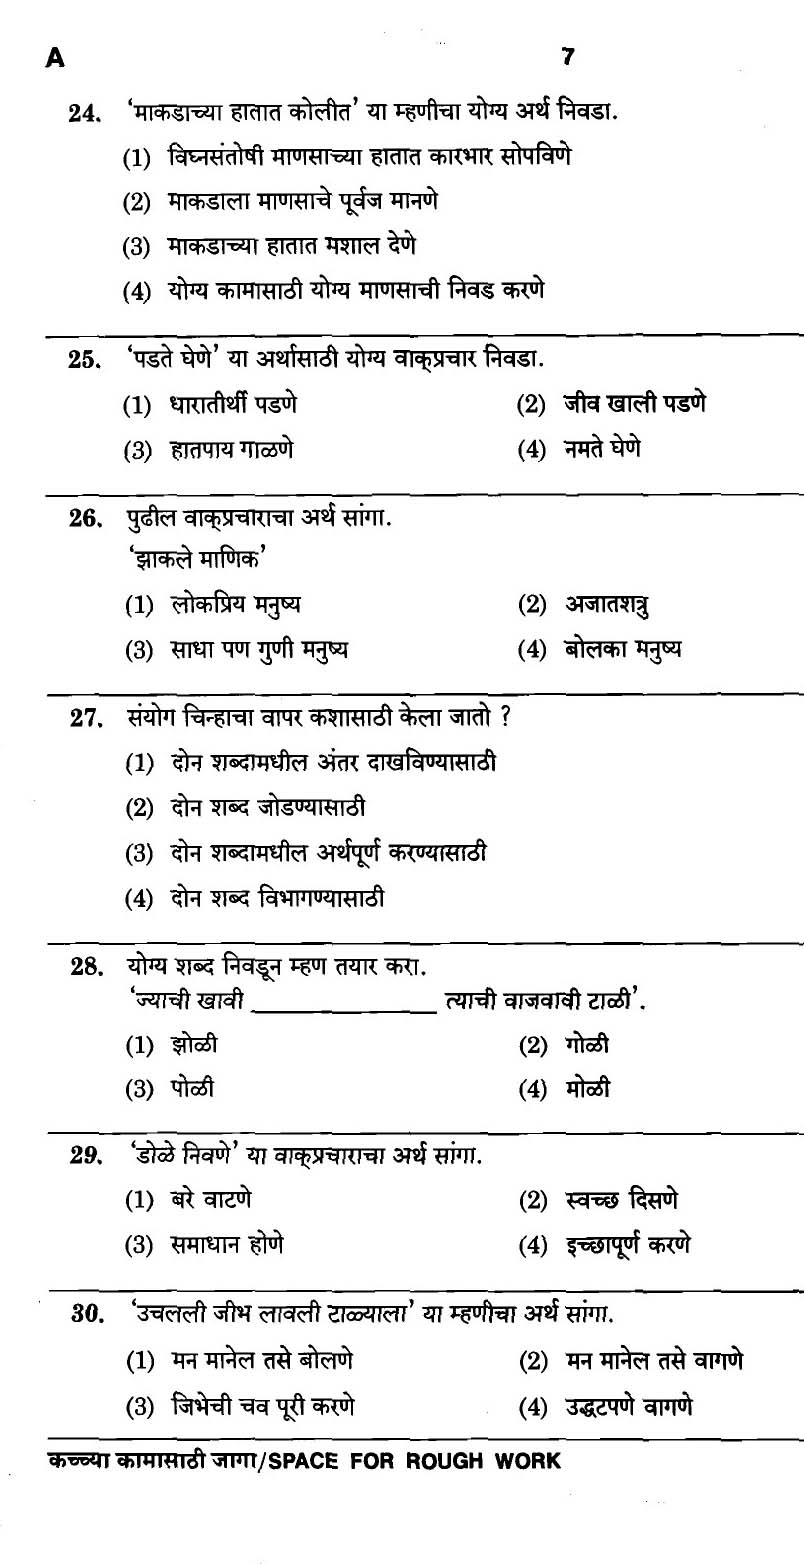 MPSC Agricultural Services Preliminary Exam 2011 Question Paper 6